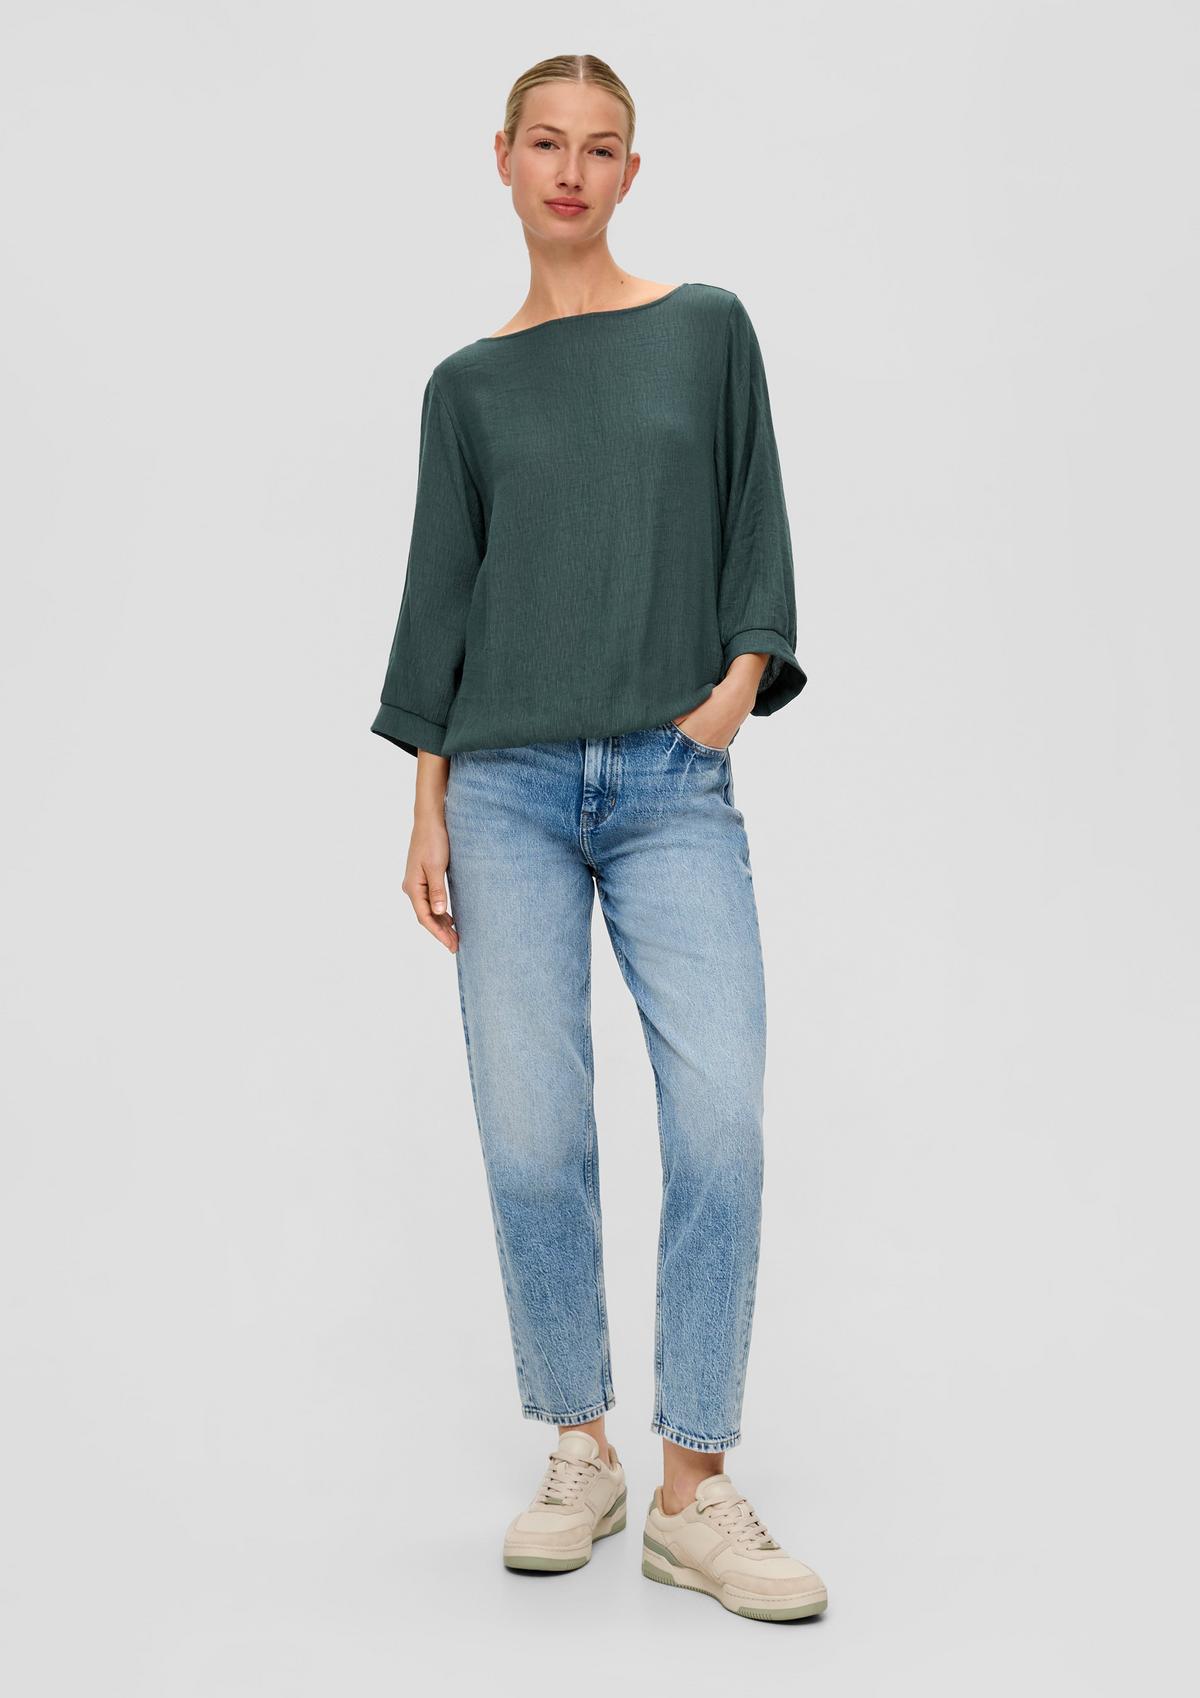 Long sleeve with a smooth back section - sage green | s.Oliver